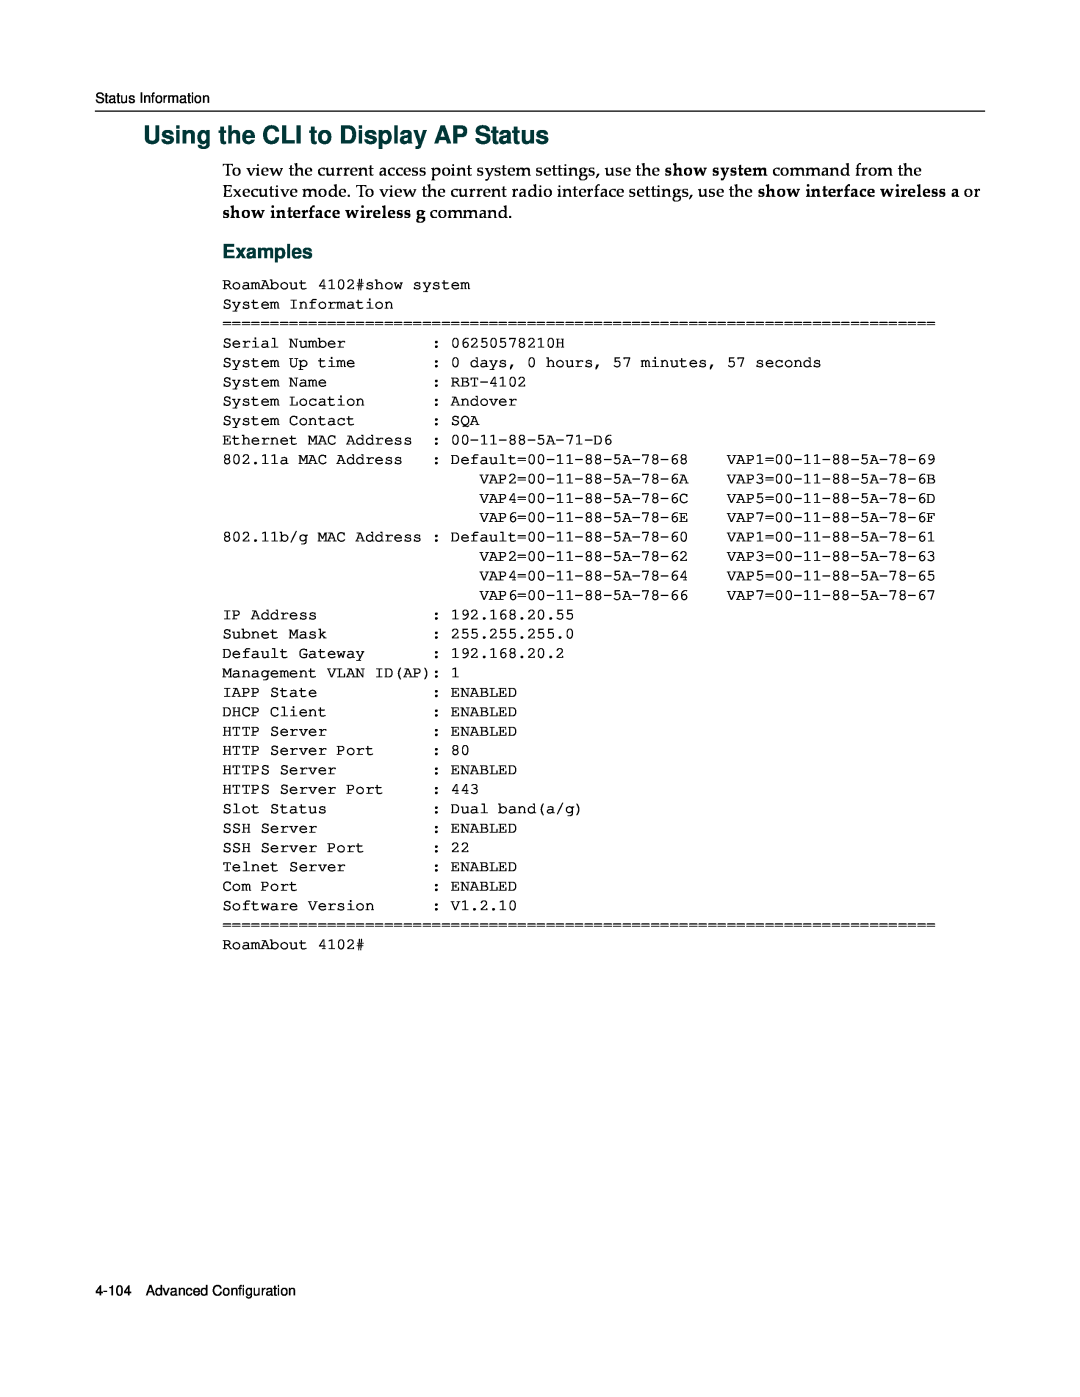 Enterasys Networks RBT-4102 manual Using the CLI to Display AP Status, Examples 